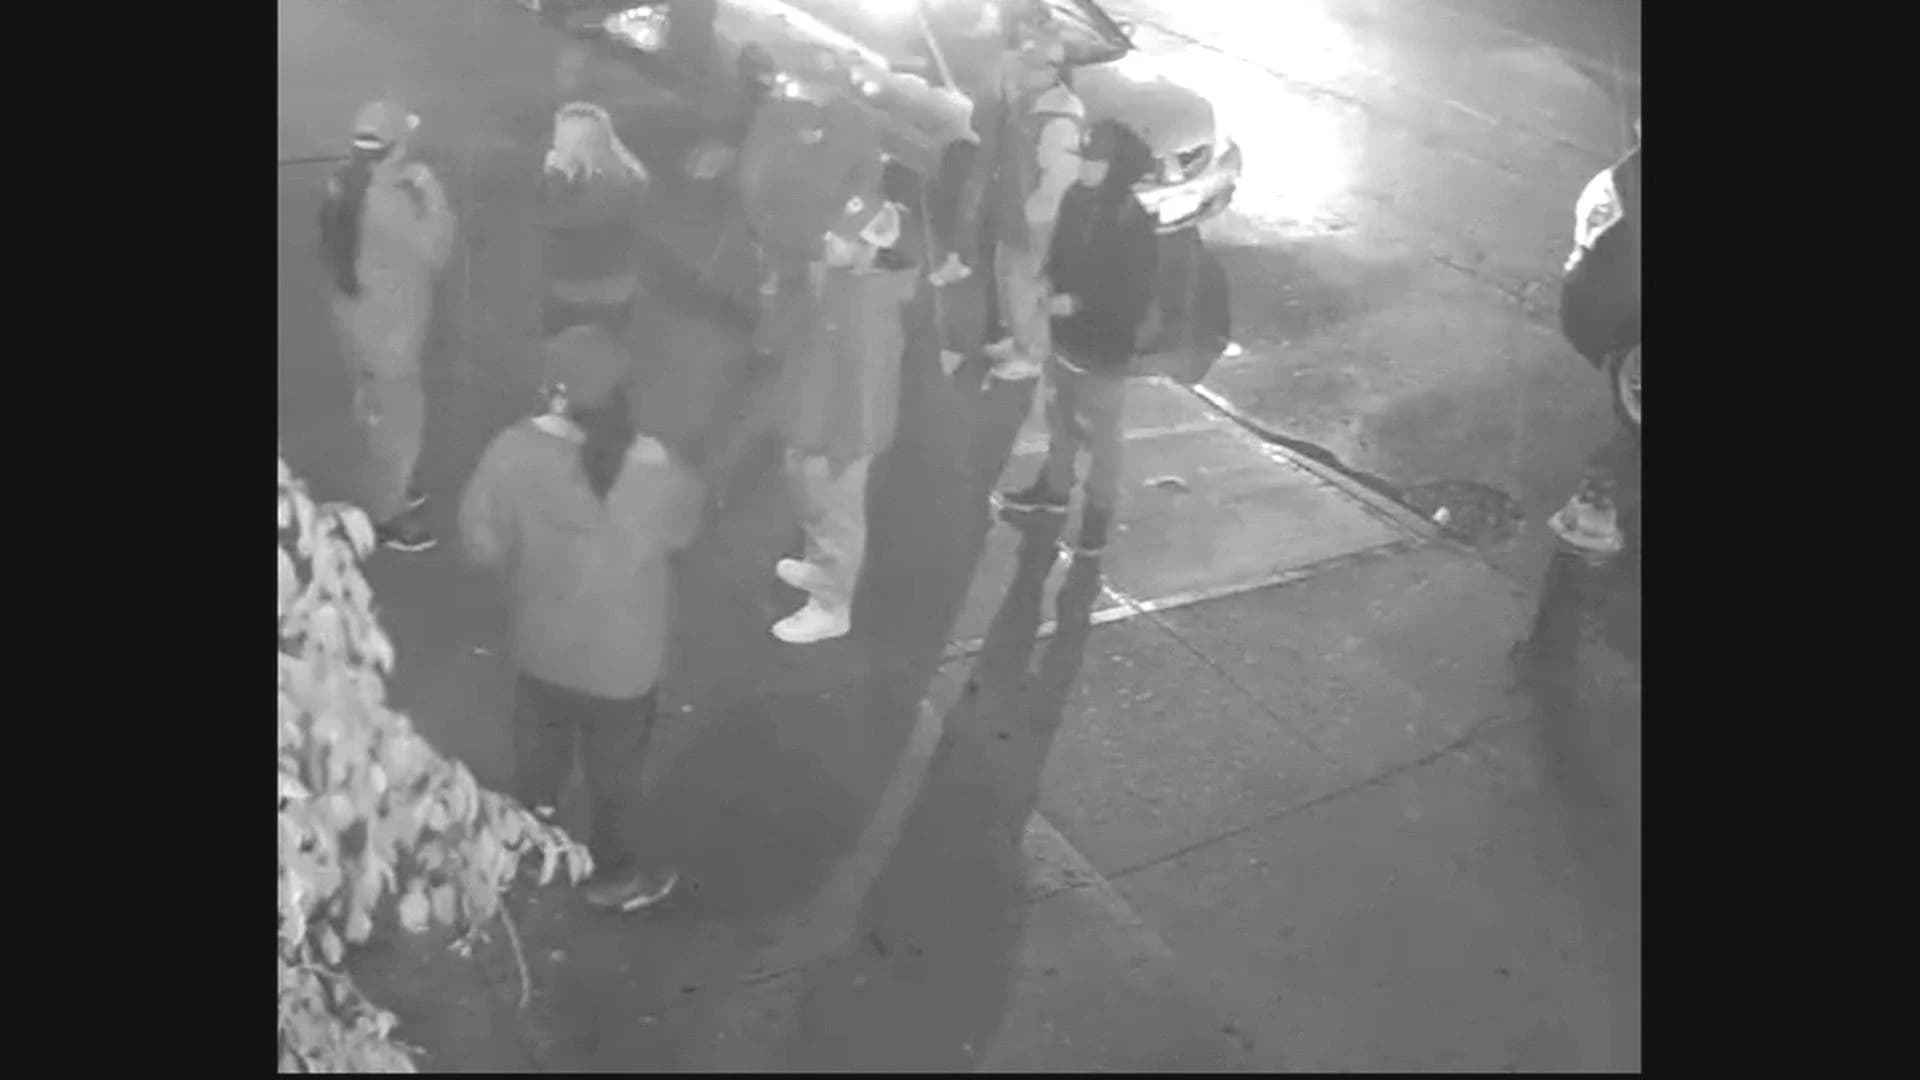 Police search for suspects in Jerome Ave. attempted robbery